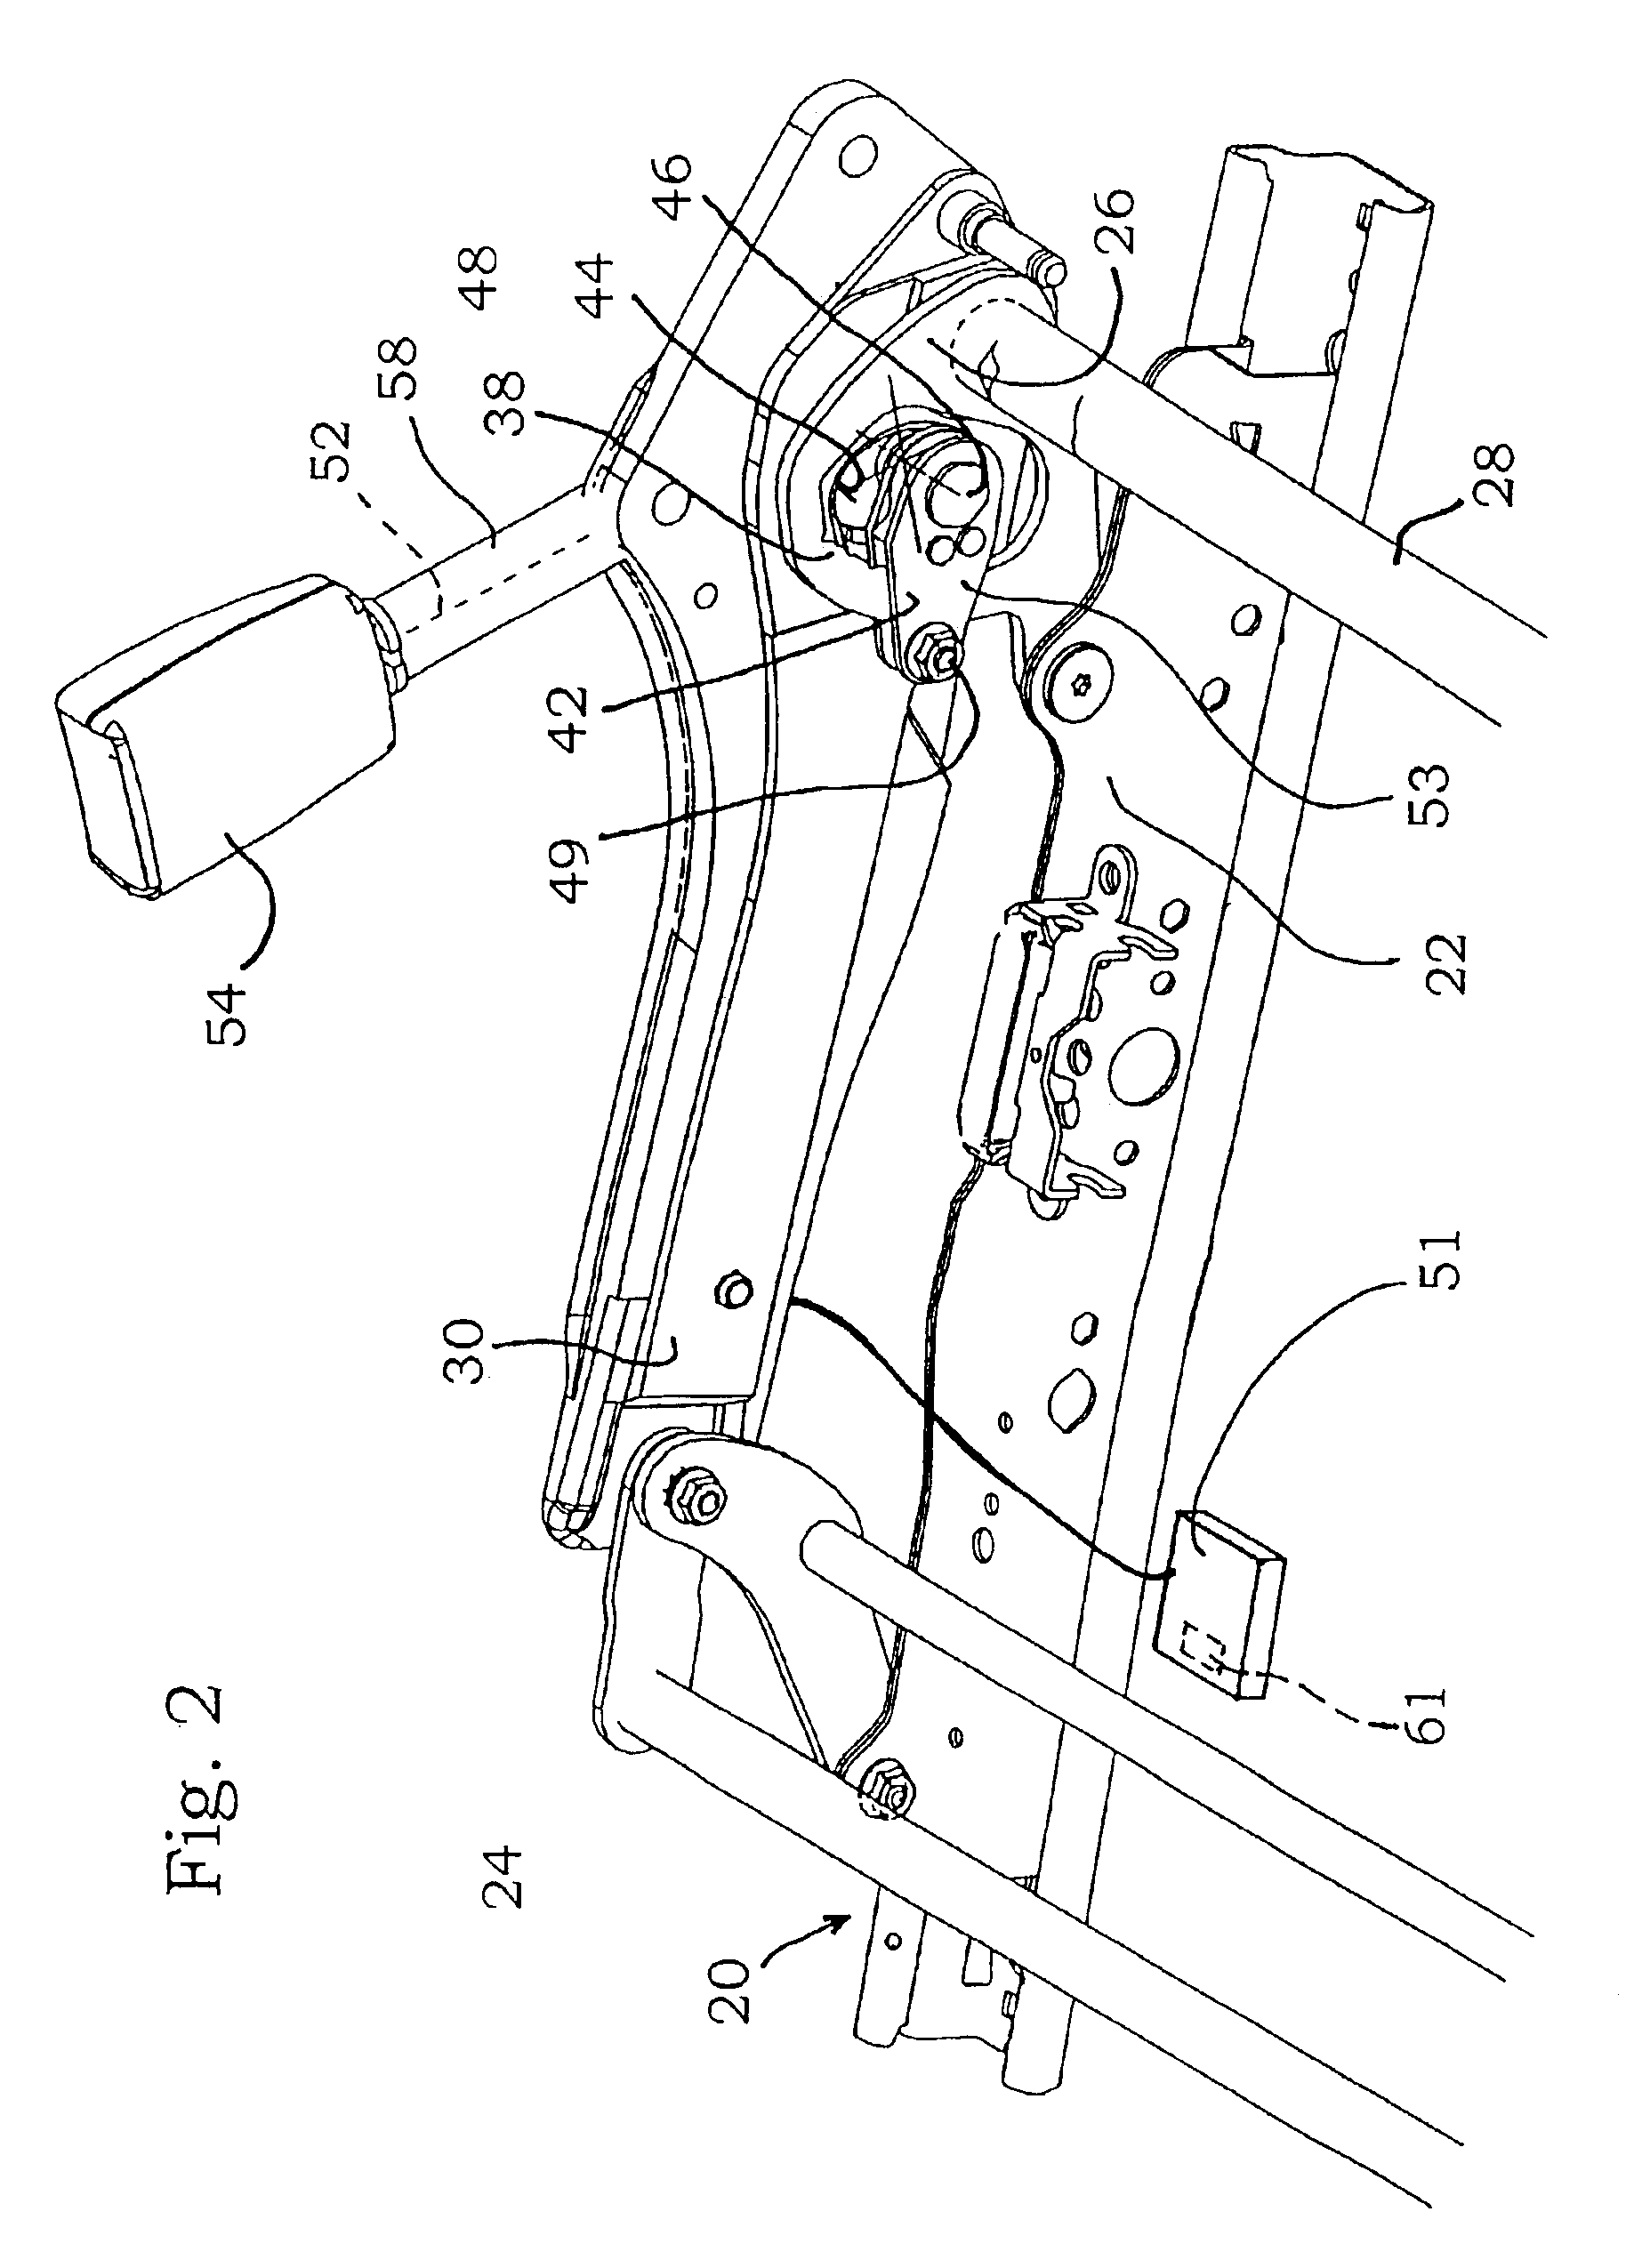 Vehicle seat with a catch on one side and with a retaining device